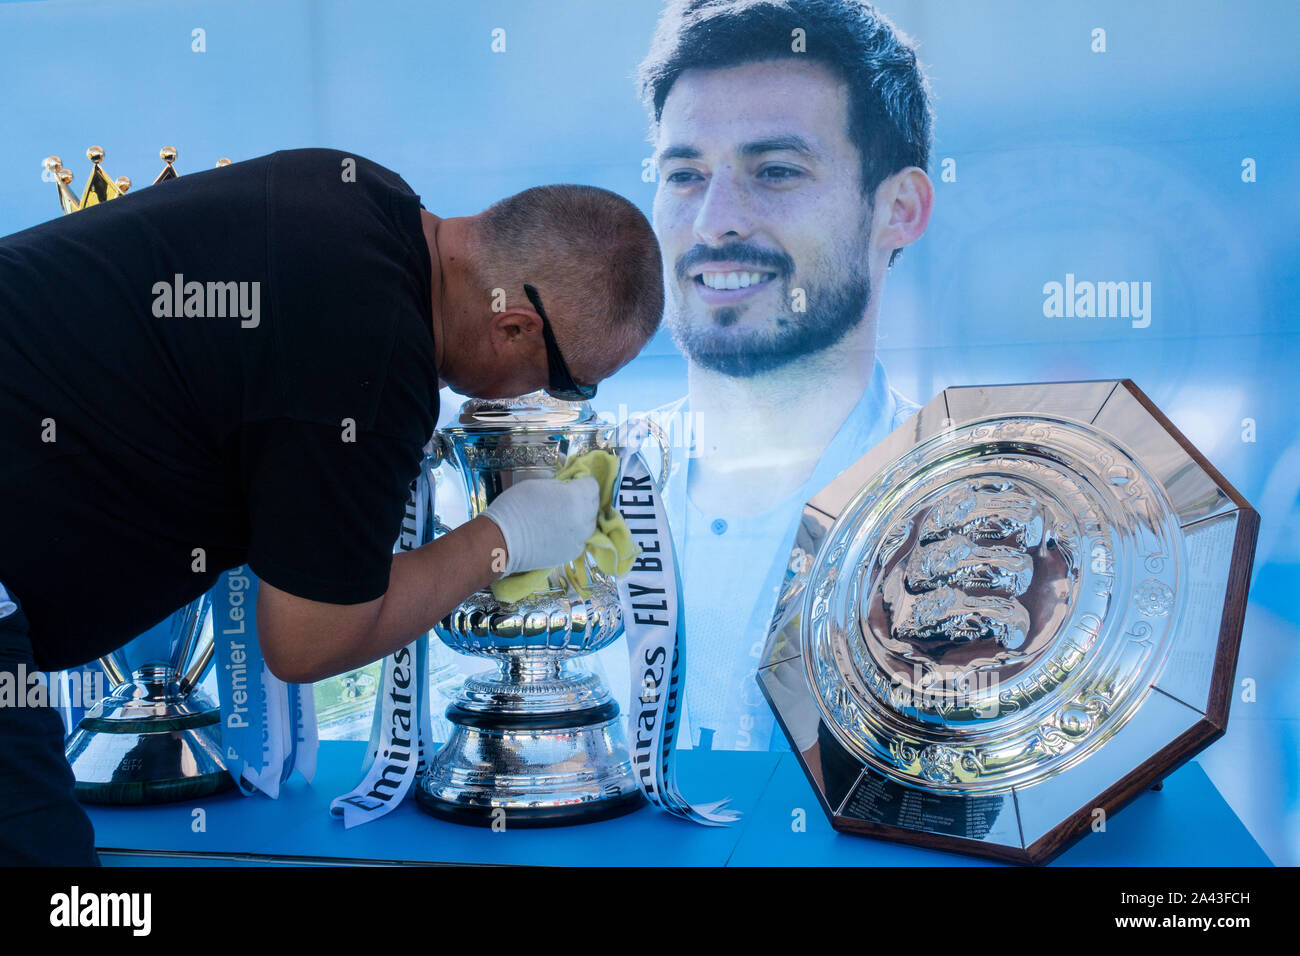 Gran Canaria, Canary Islands, Spain. 11th October, 2019. Manchester City club captain, David Silva, signs autographs and poses for photos as he showcases the clubs four trophies from last season at the ground where he started his playing career, in his hometown, Arguineguín, on Gran Canaria. The trophies have been showcased to fans in cities across the world as part of the club's Trophy Tour. PICTURED; The FA Cup is given a polish before the crowds arrive. Credit: Alan Dawson/Alamy Live News Stock Photo